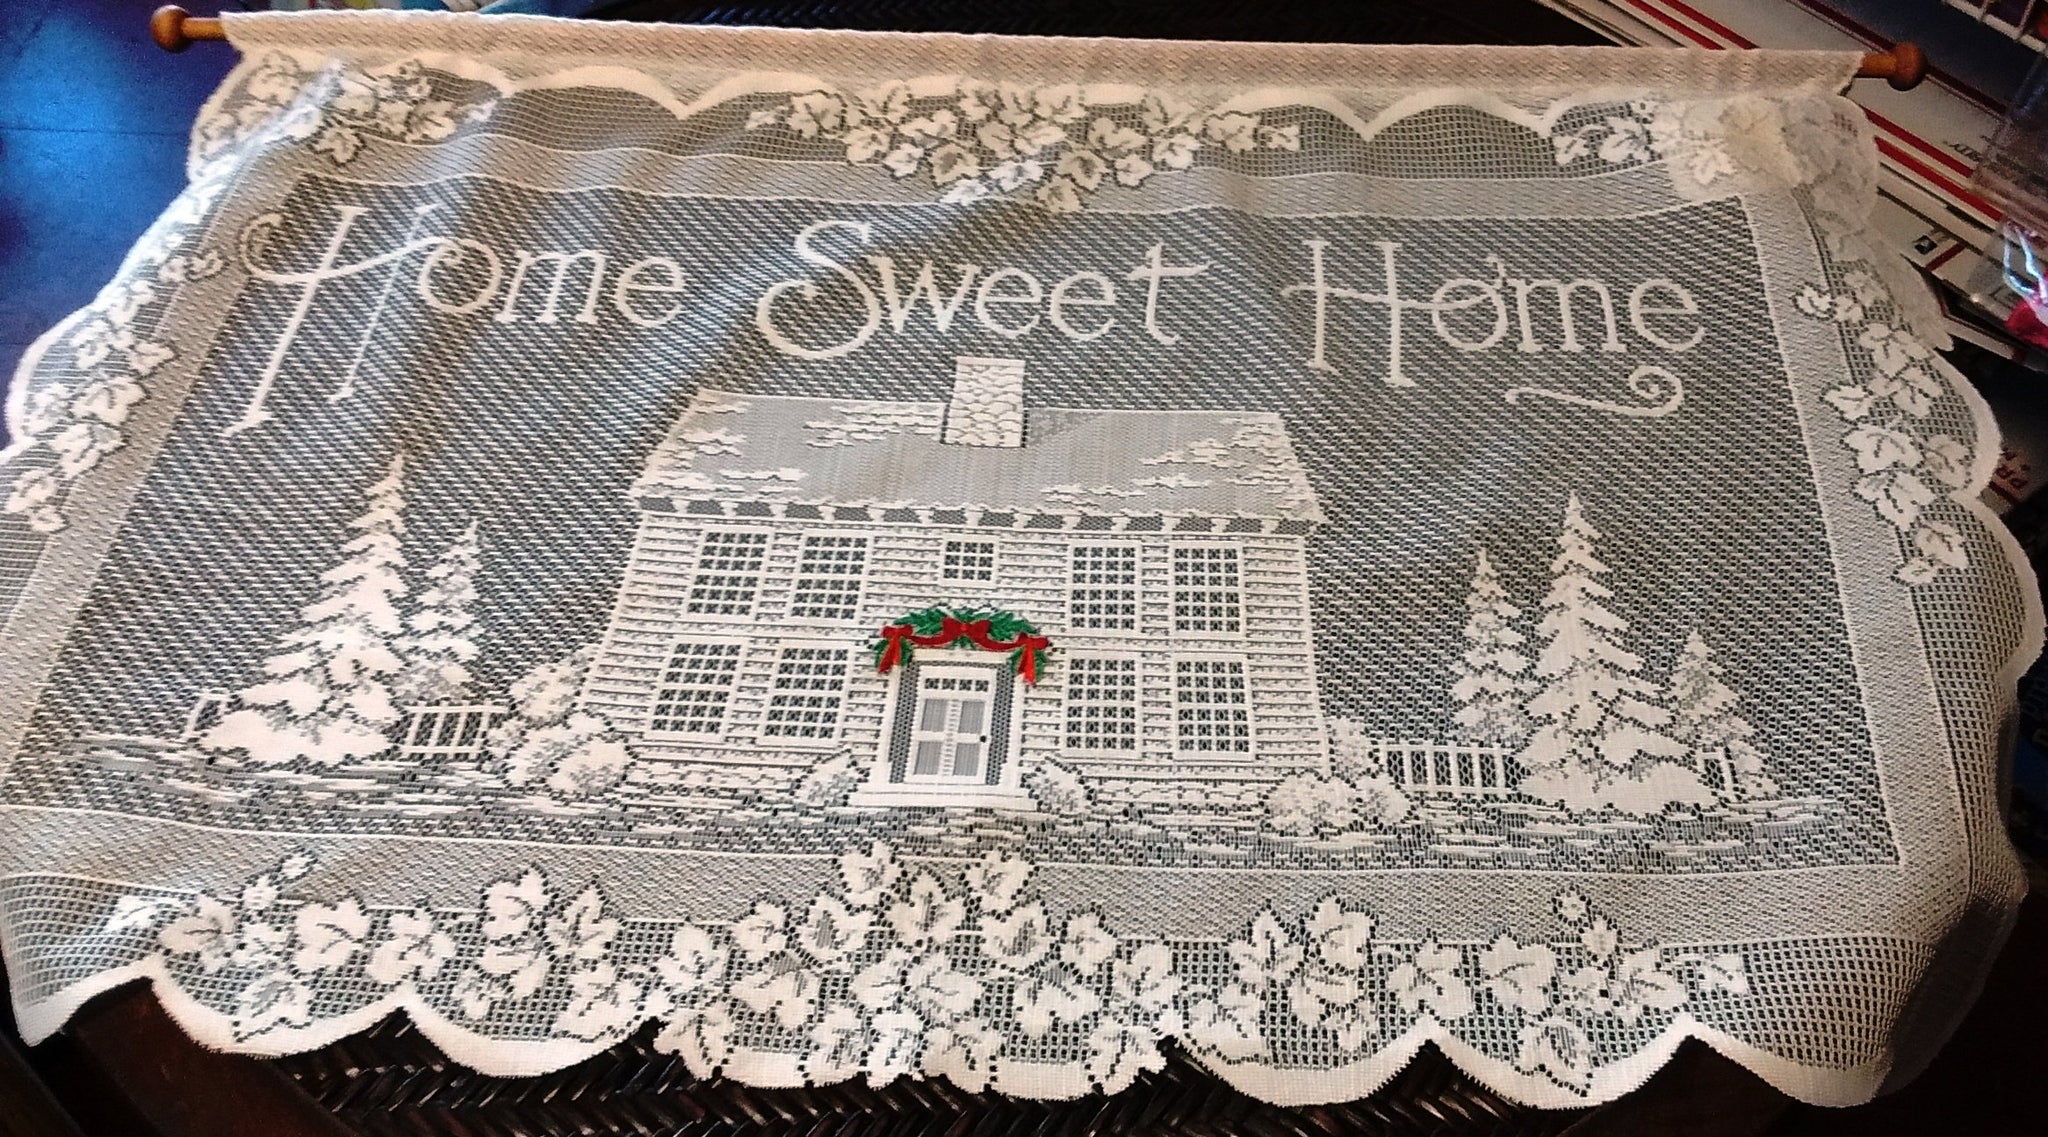 Heritage Lace Christmas -Home Sweet Home - Hanging with Seasonal Garland Made in USA - Olde Church Emporium